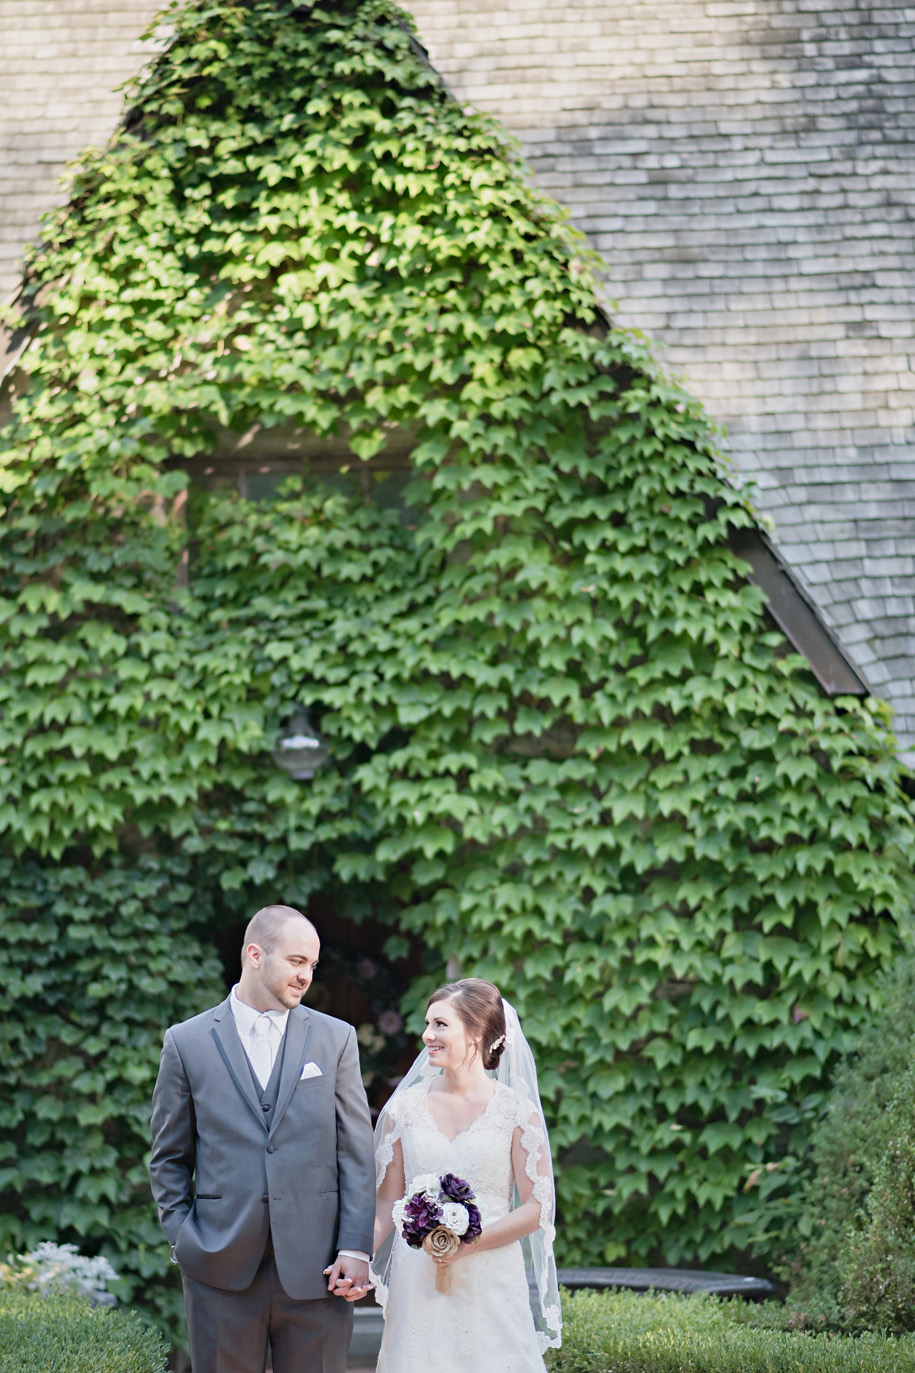 Bride and Groom Portrait in from of the Castle l Purple, Cream and Grey Wedding l Rustic and Romantic Outdoor Inner Circle Estate Wedding in the woods by Kari Dawson